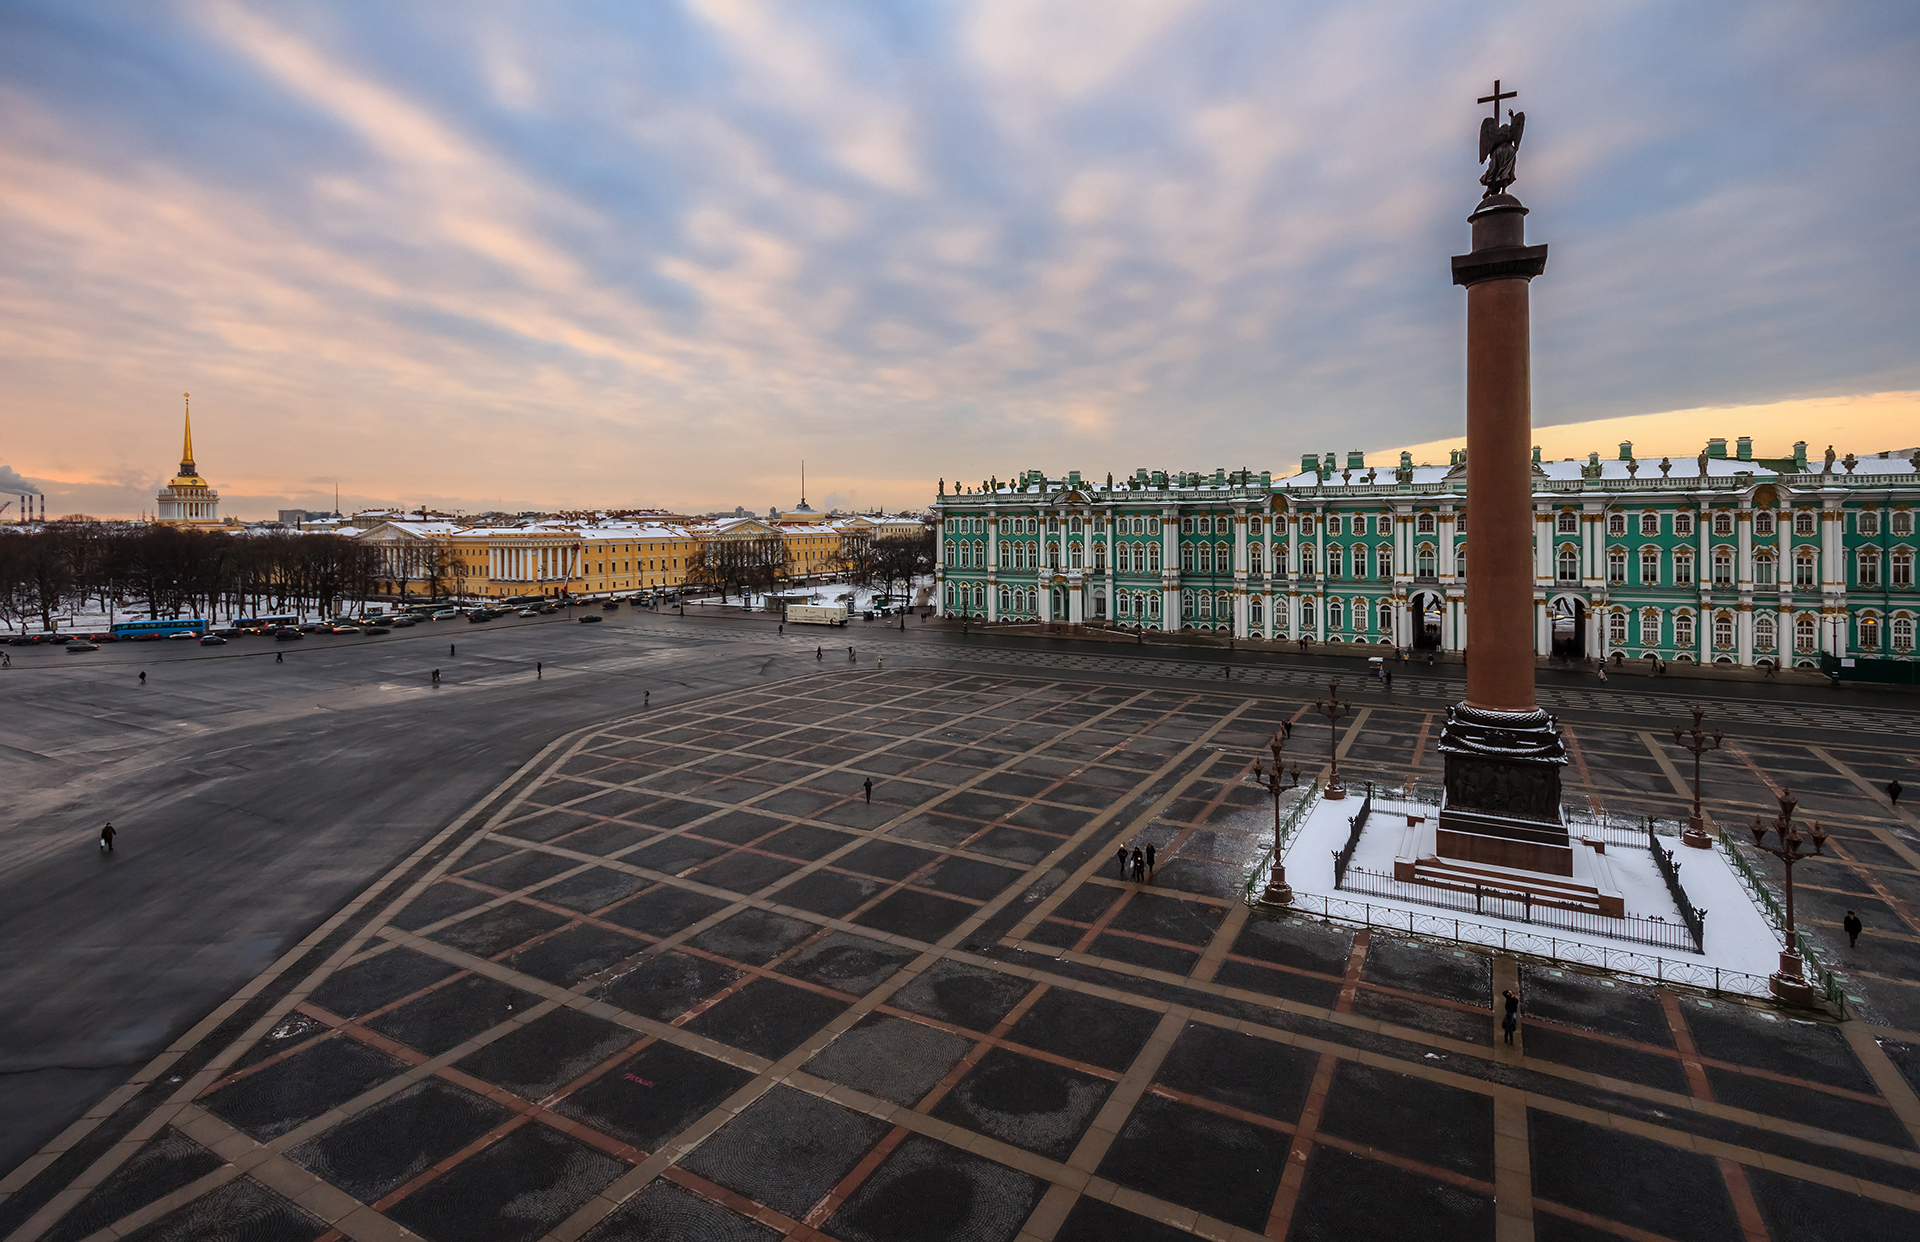 St. Petersburg’s Hermitage Museum is the treasure chest of Russia. Founded by Empress Catherine the Great, the teal palace on the bank of the Neva River contains one of the world’s most renowned art collections.